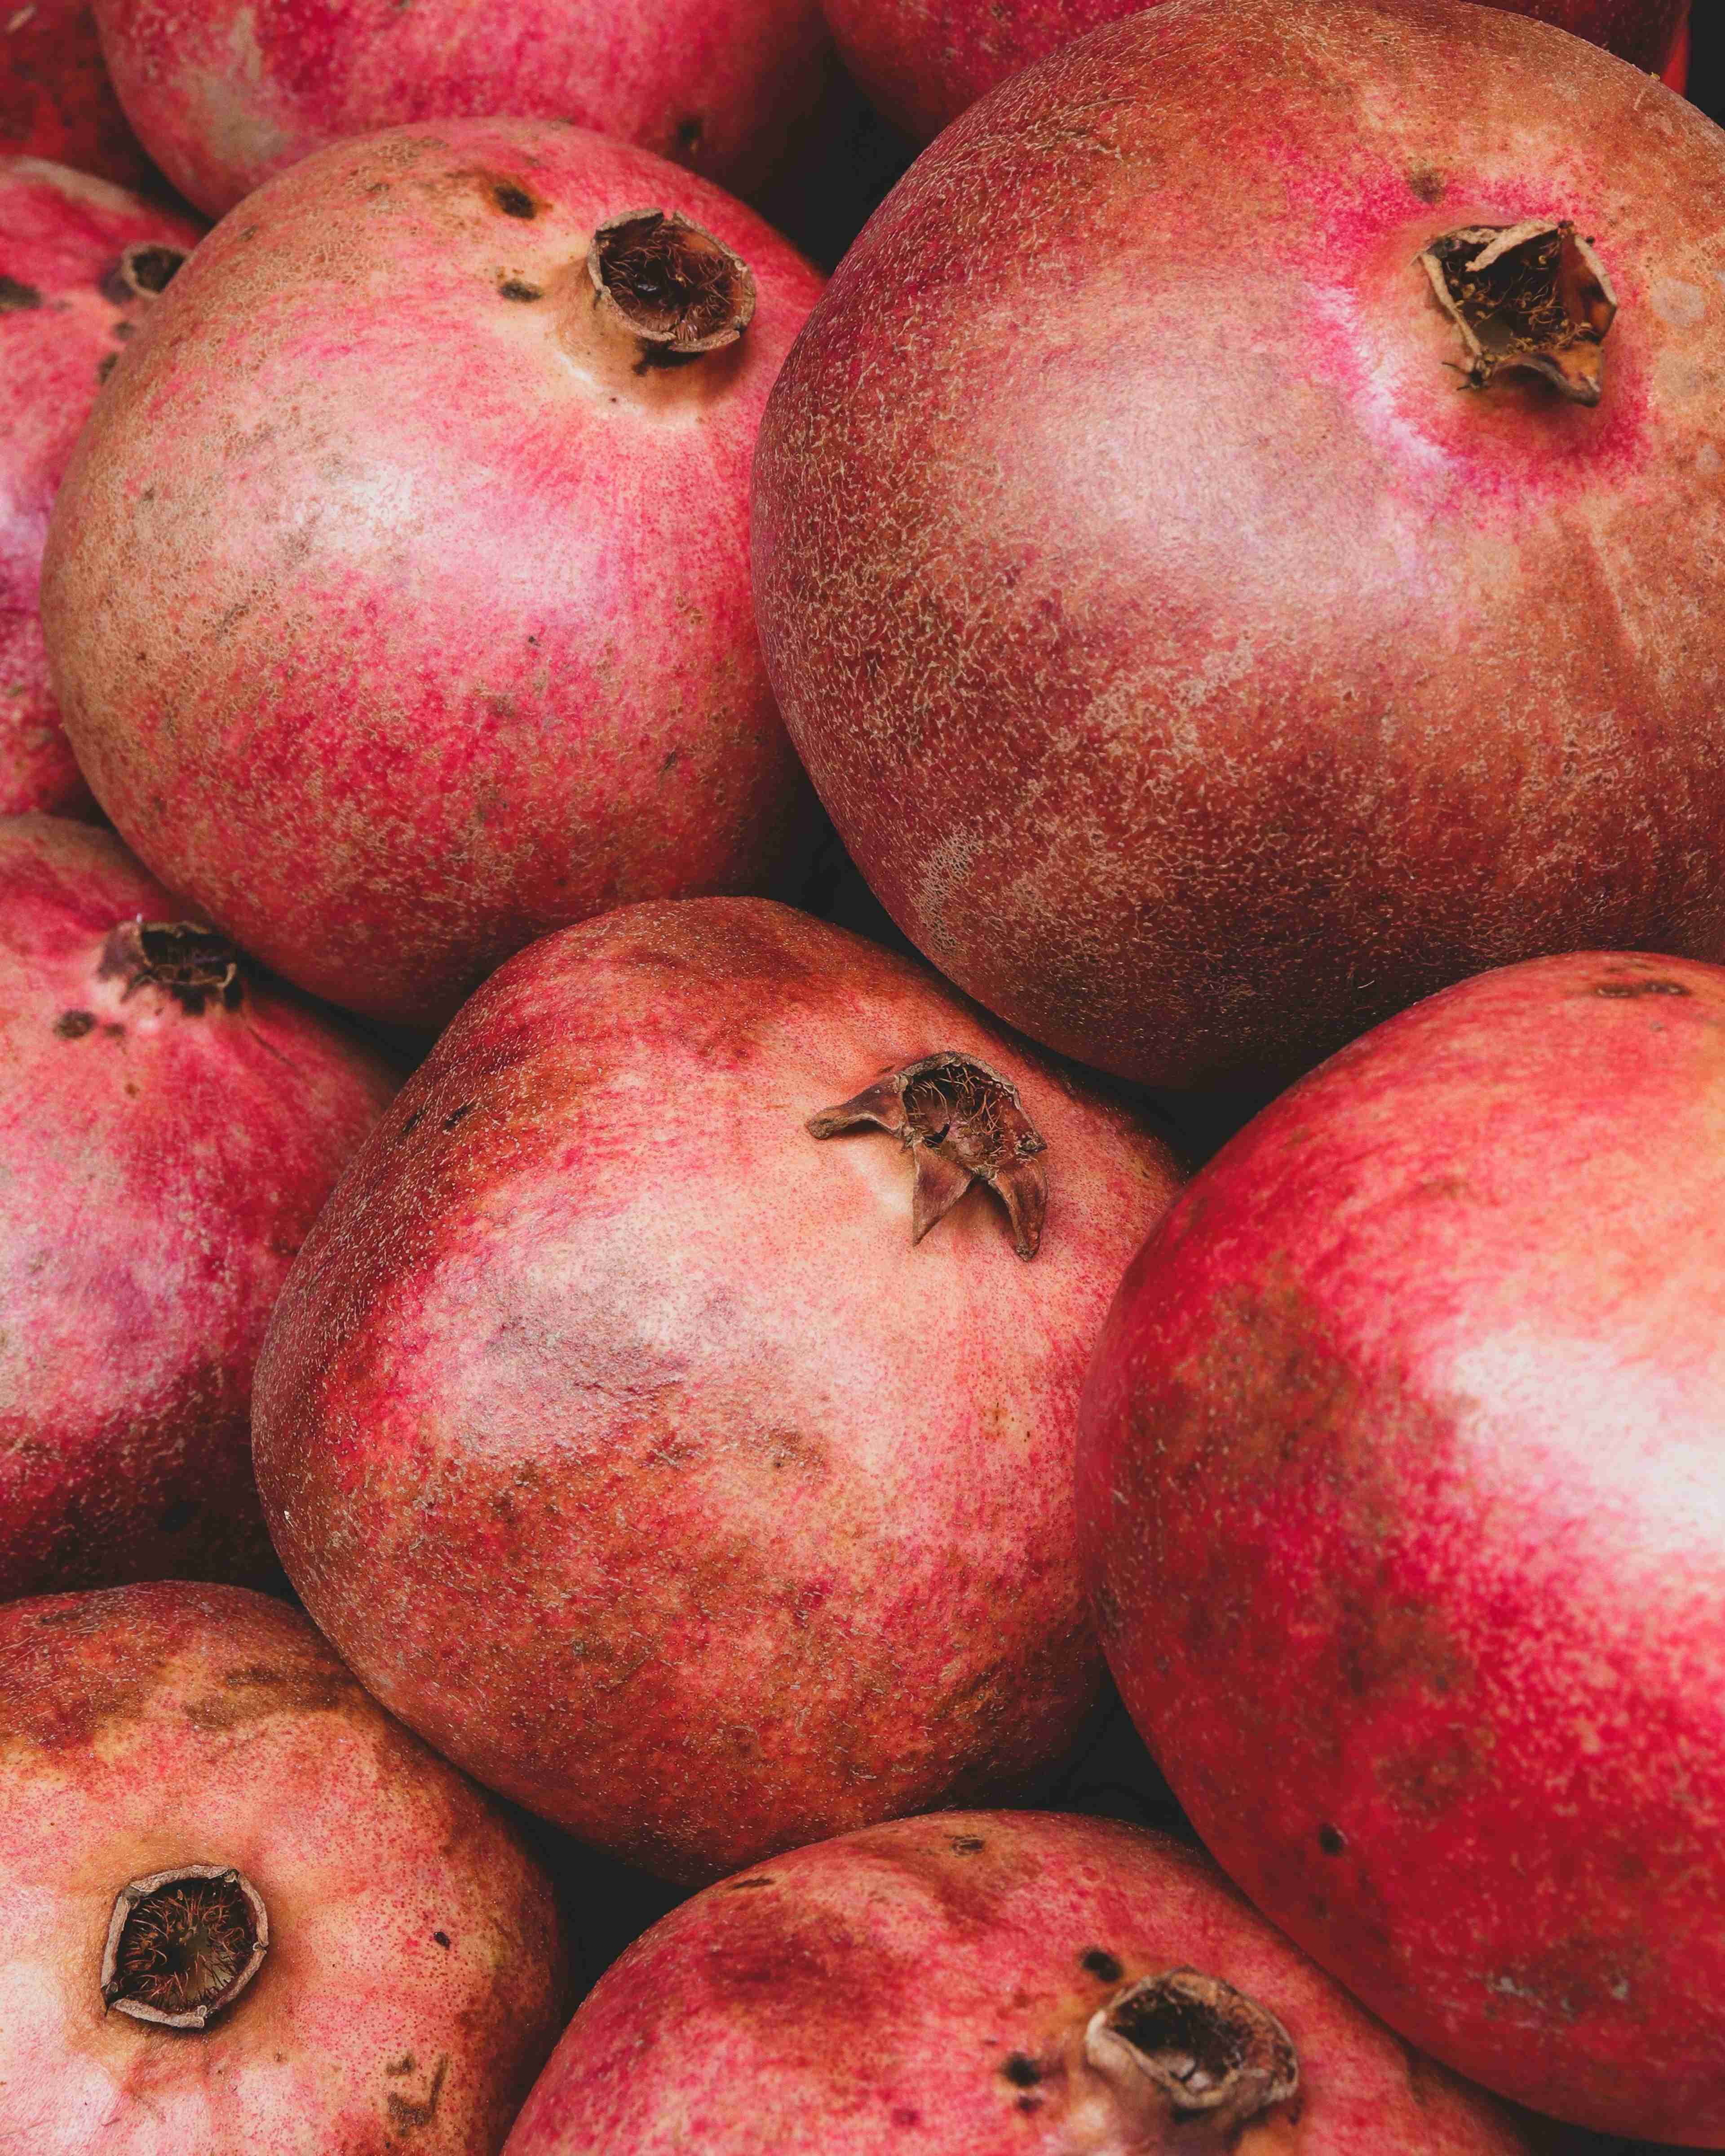 Close-up of a group of pomegranates with rich red and pinkish hues, showcasing their natural mottled textures and crown-like stems.